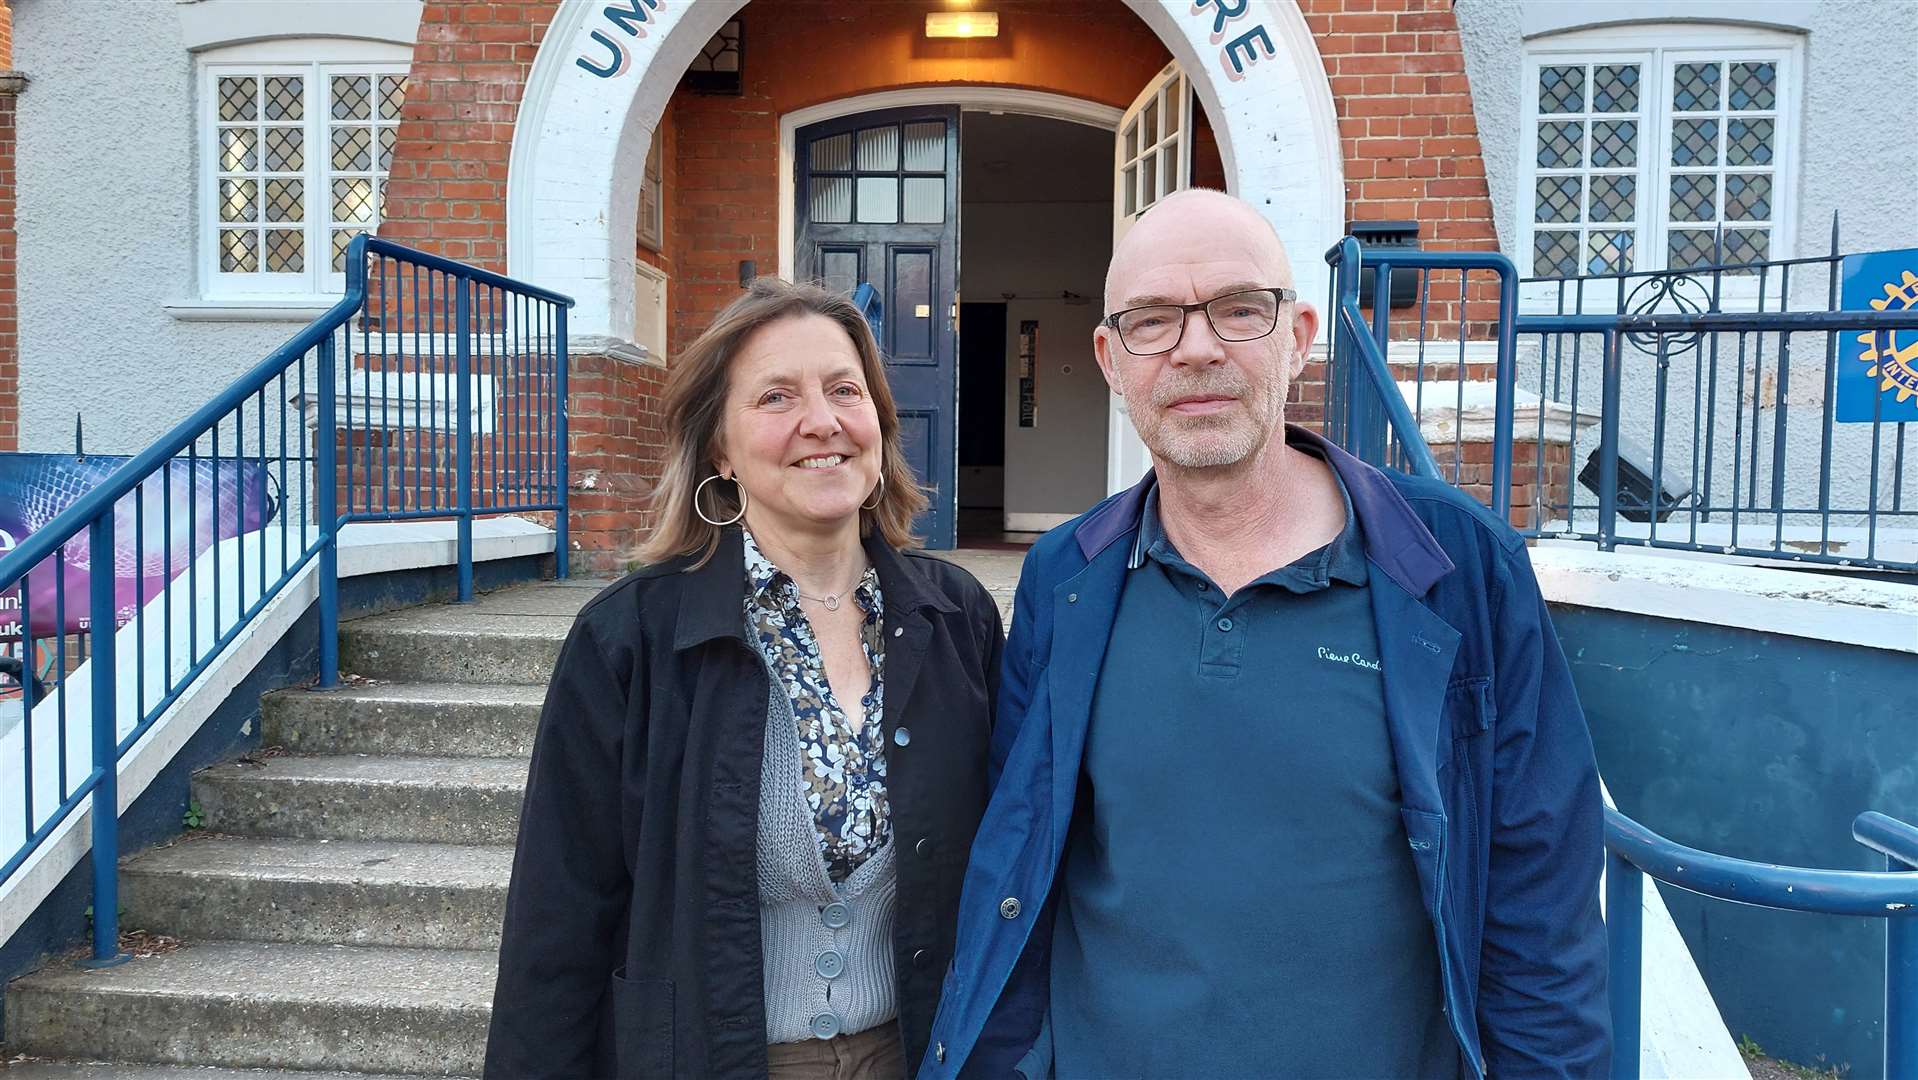 Cllr Clare Turnbull and Cllr Steven Wheeler from Canterbury City Council's Green Party outside the Umbrella centre in Whitstable